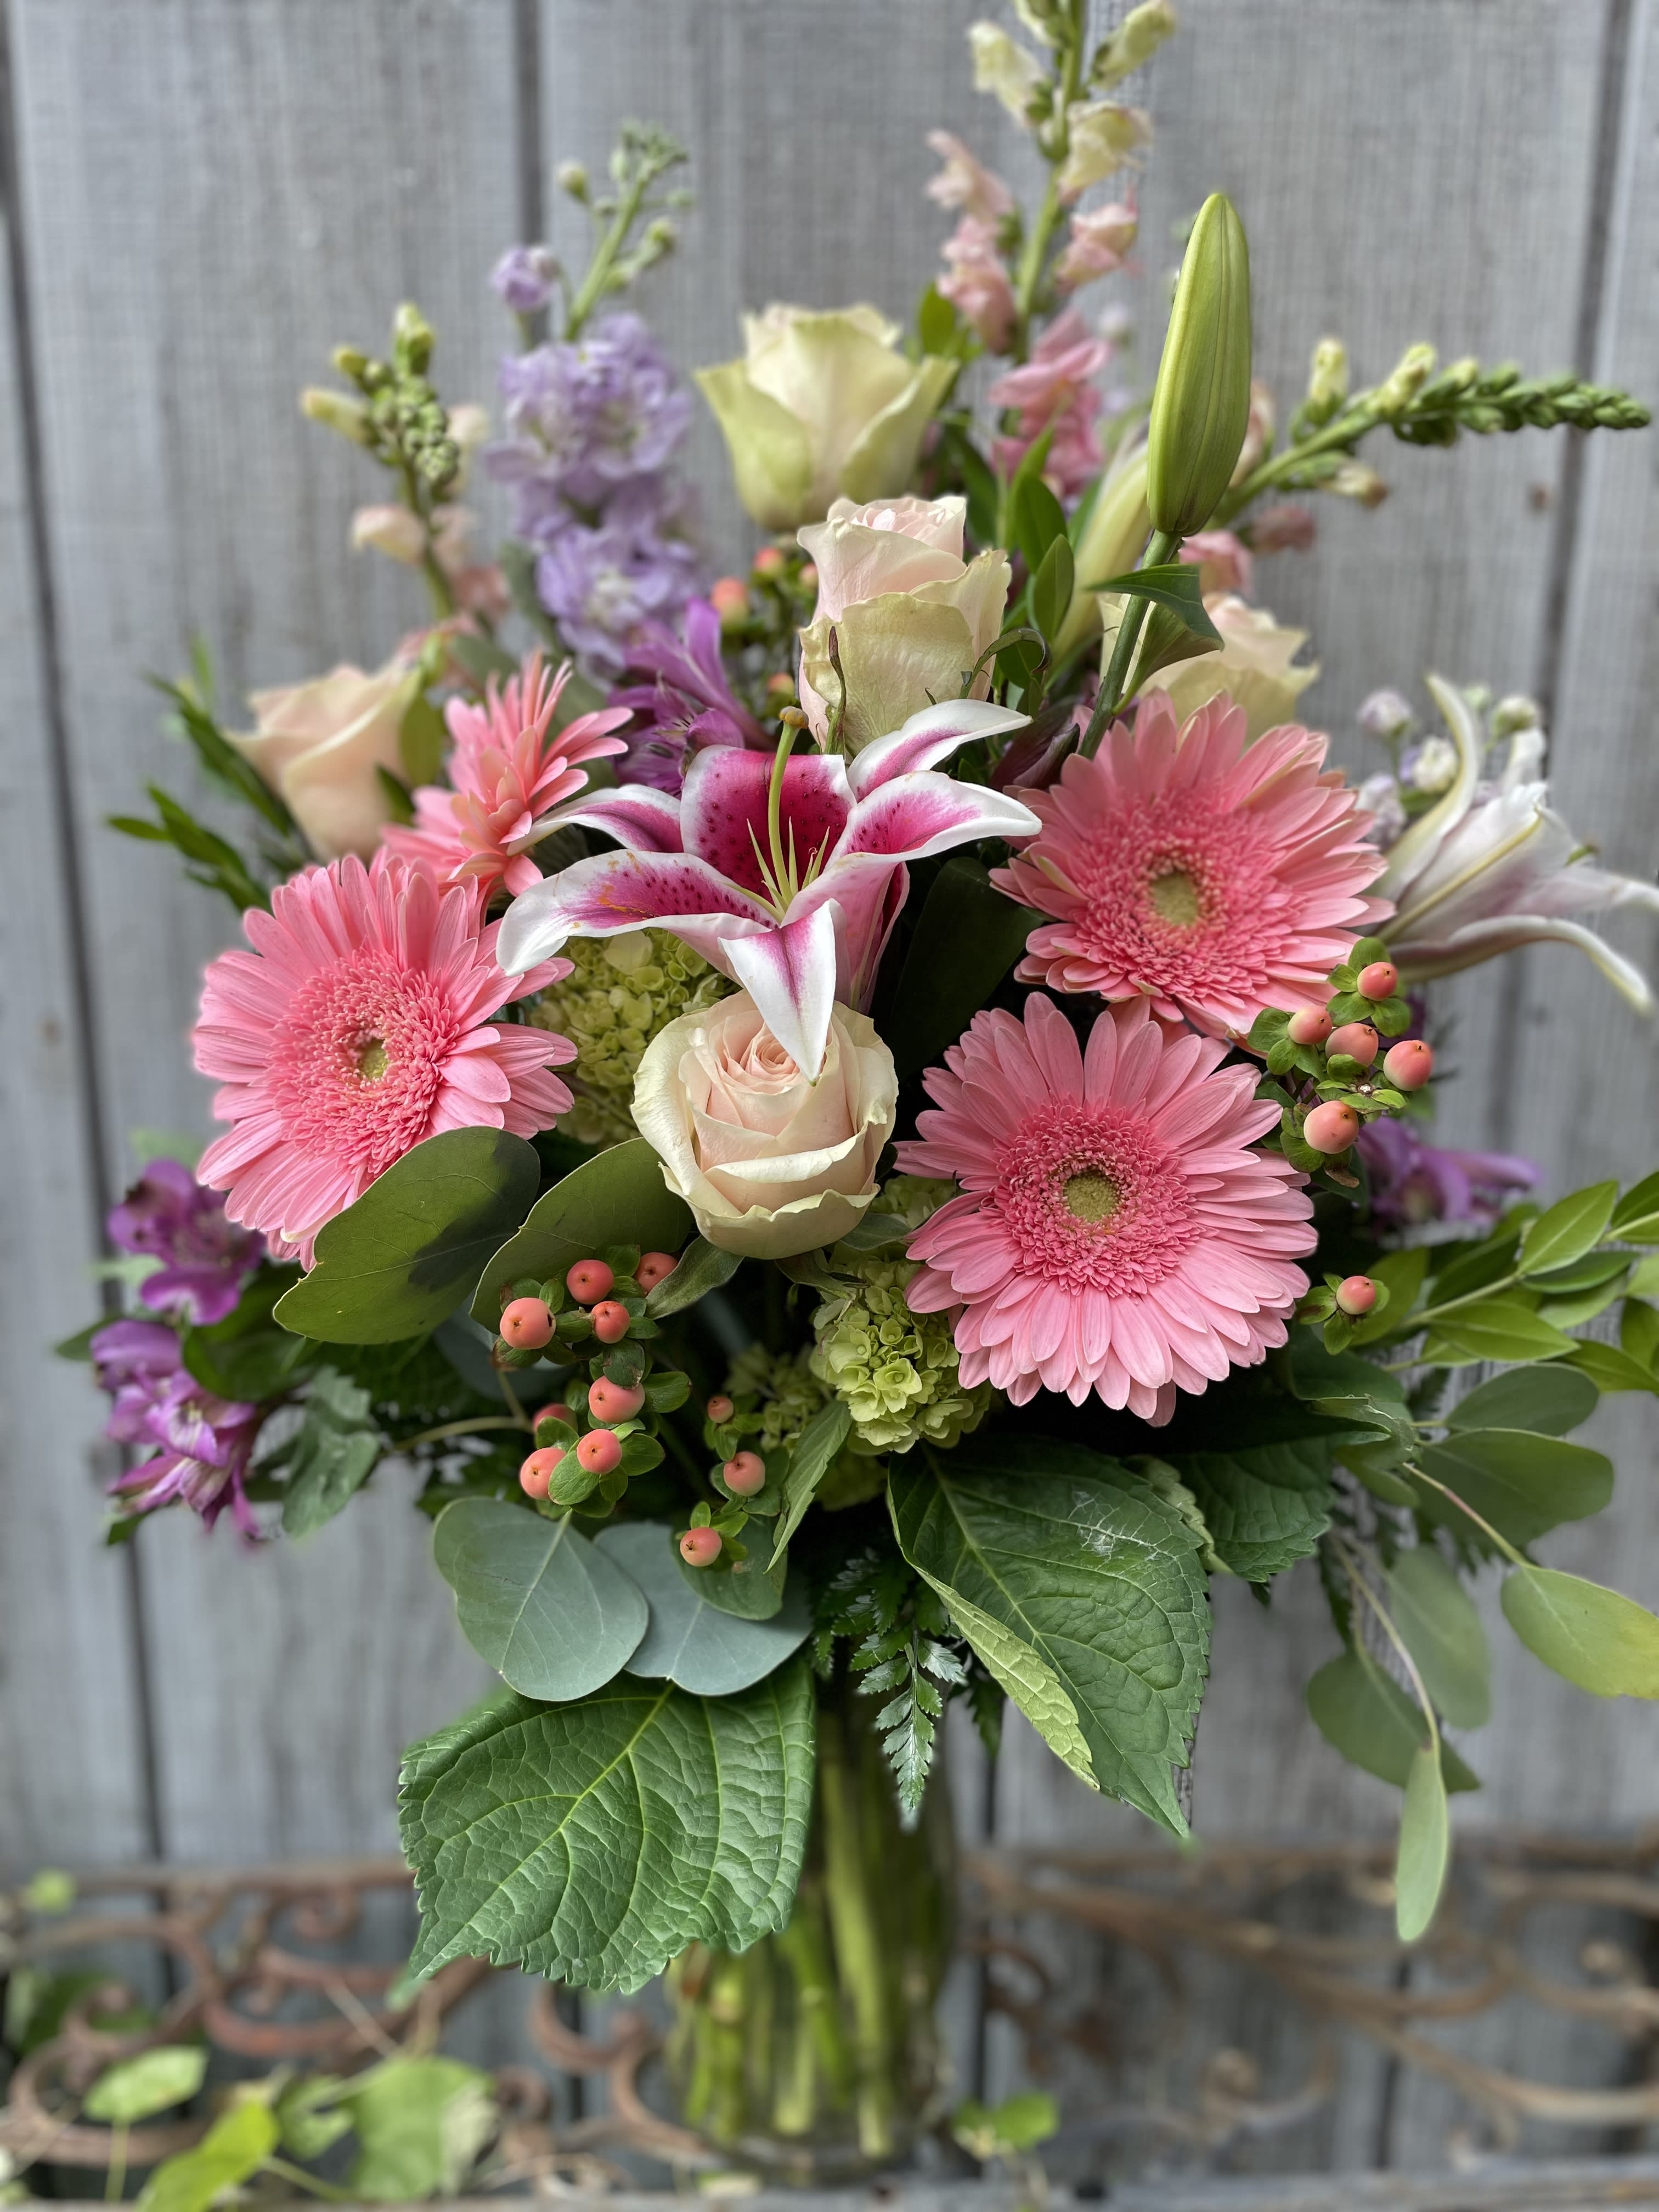 Glamorous  - What a way to make someone’s day with a glamorous mix of pastel flowers.